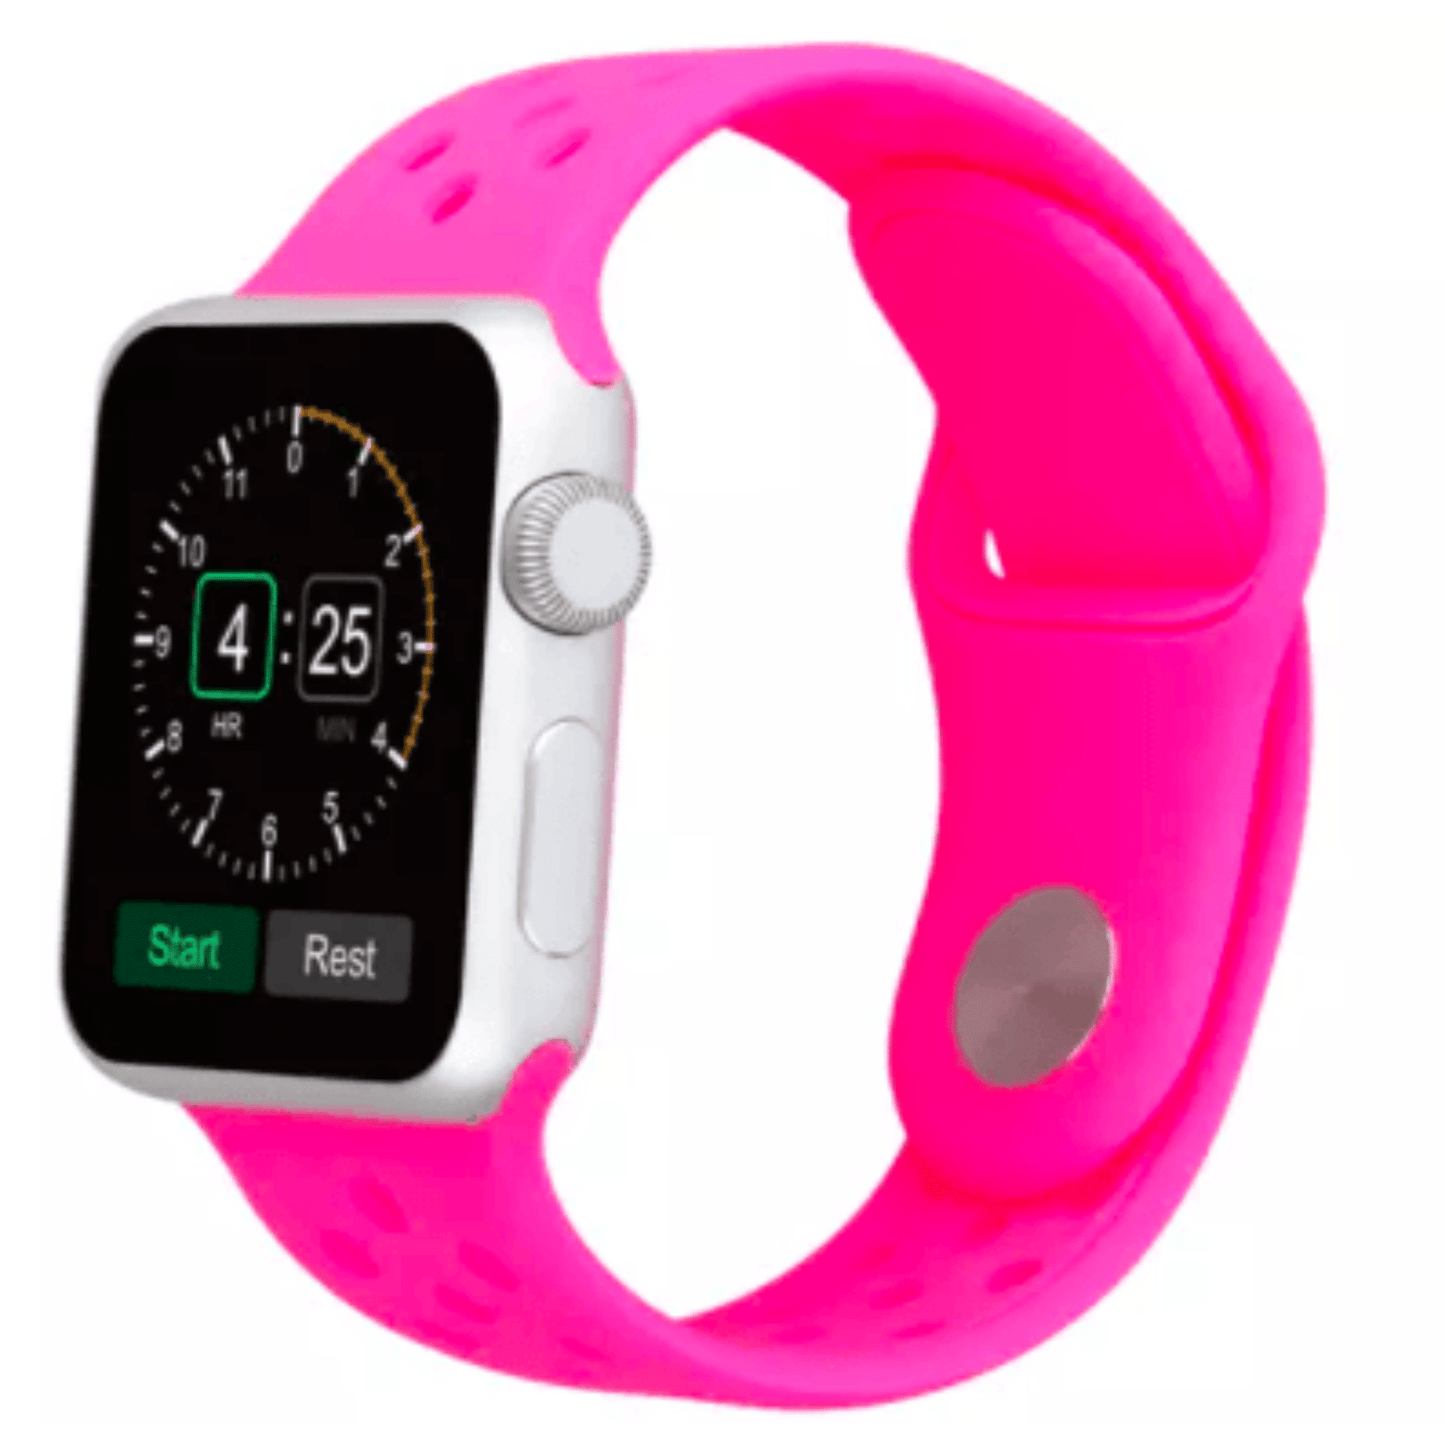 Breathable Silicone Sport Replacement Band for Apple Watch Pink Apple Watch Band Elements Watches